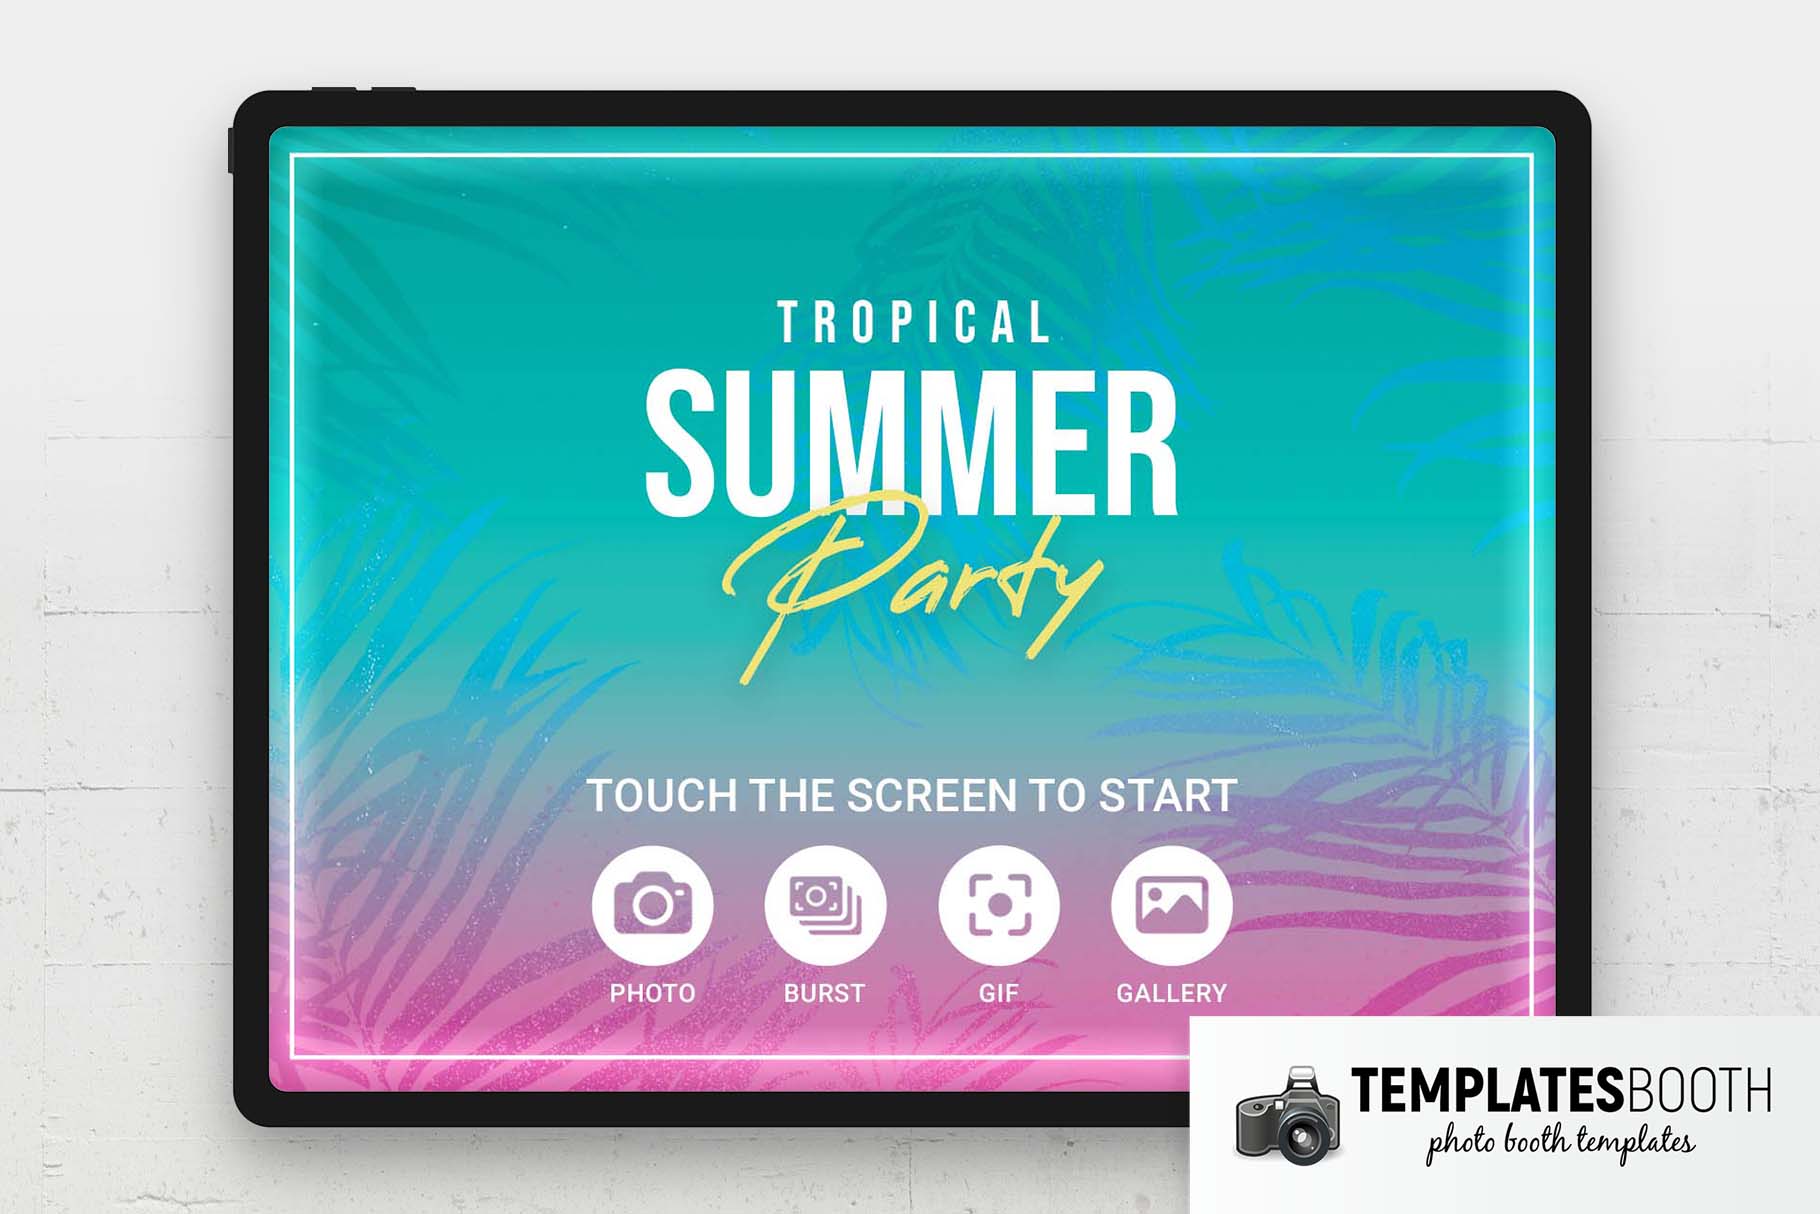 Tropical Summer Party Photo Booth Welcome Screen